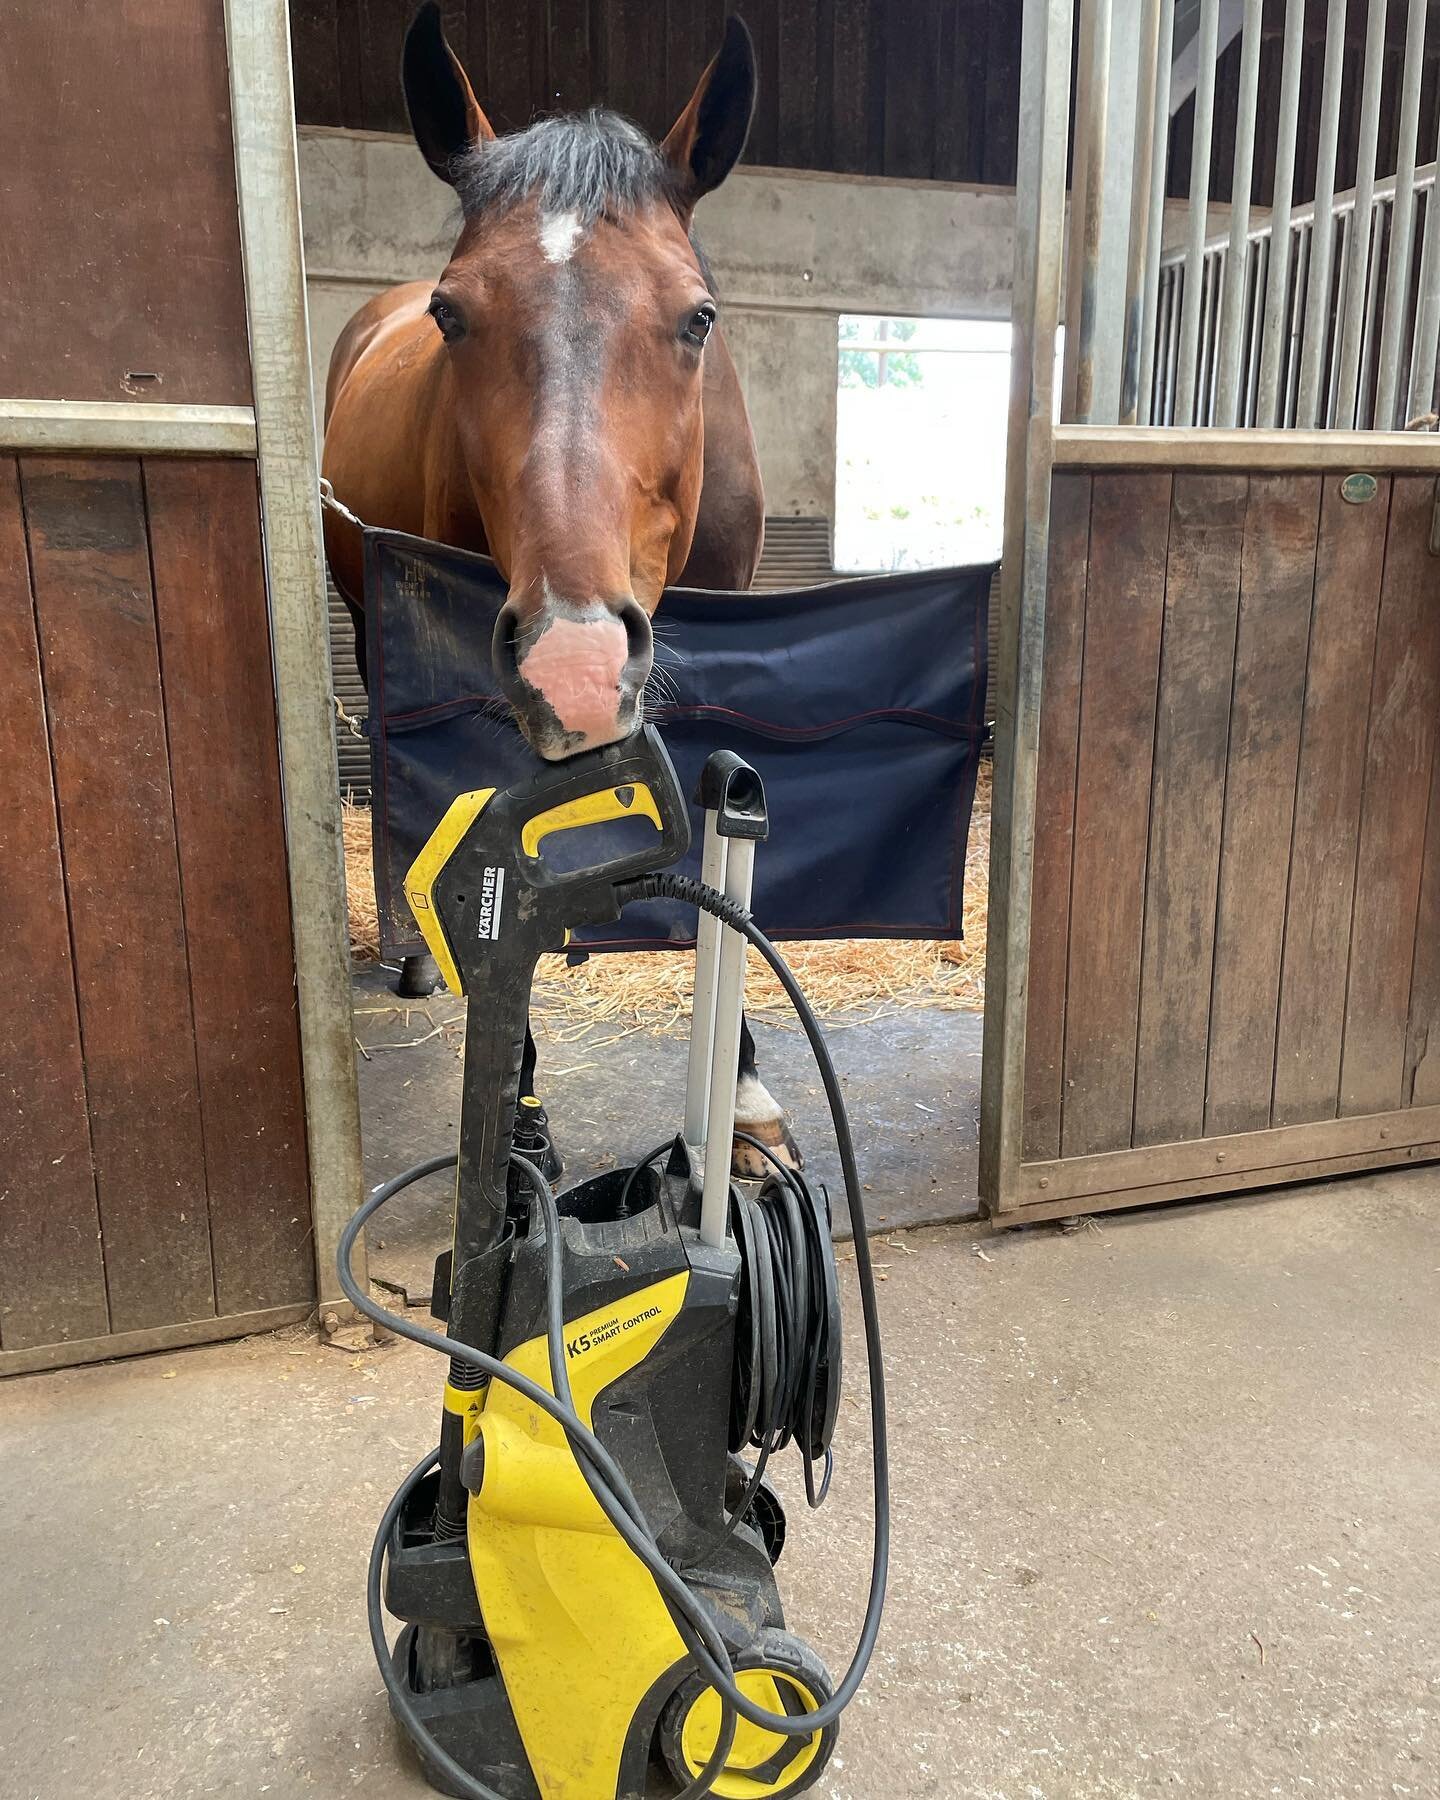 Karcher pressure washer, powered by real horsepower. @karcher_uk #horsepower #karcherclean #karcheruk #springcleaning